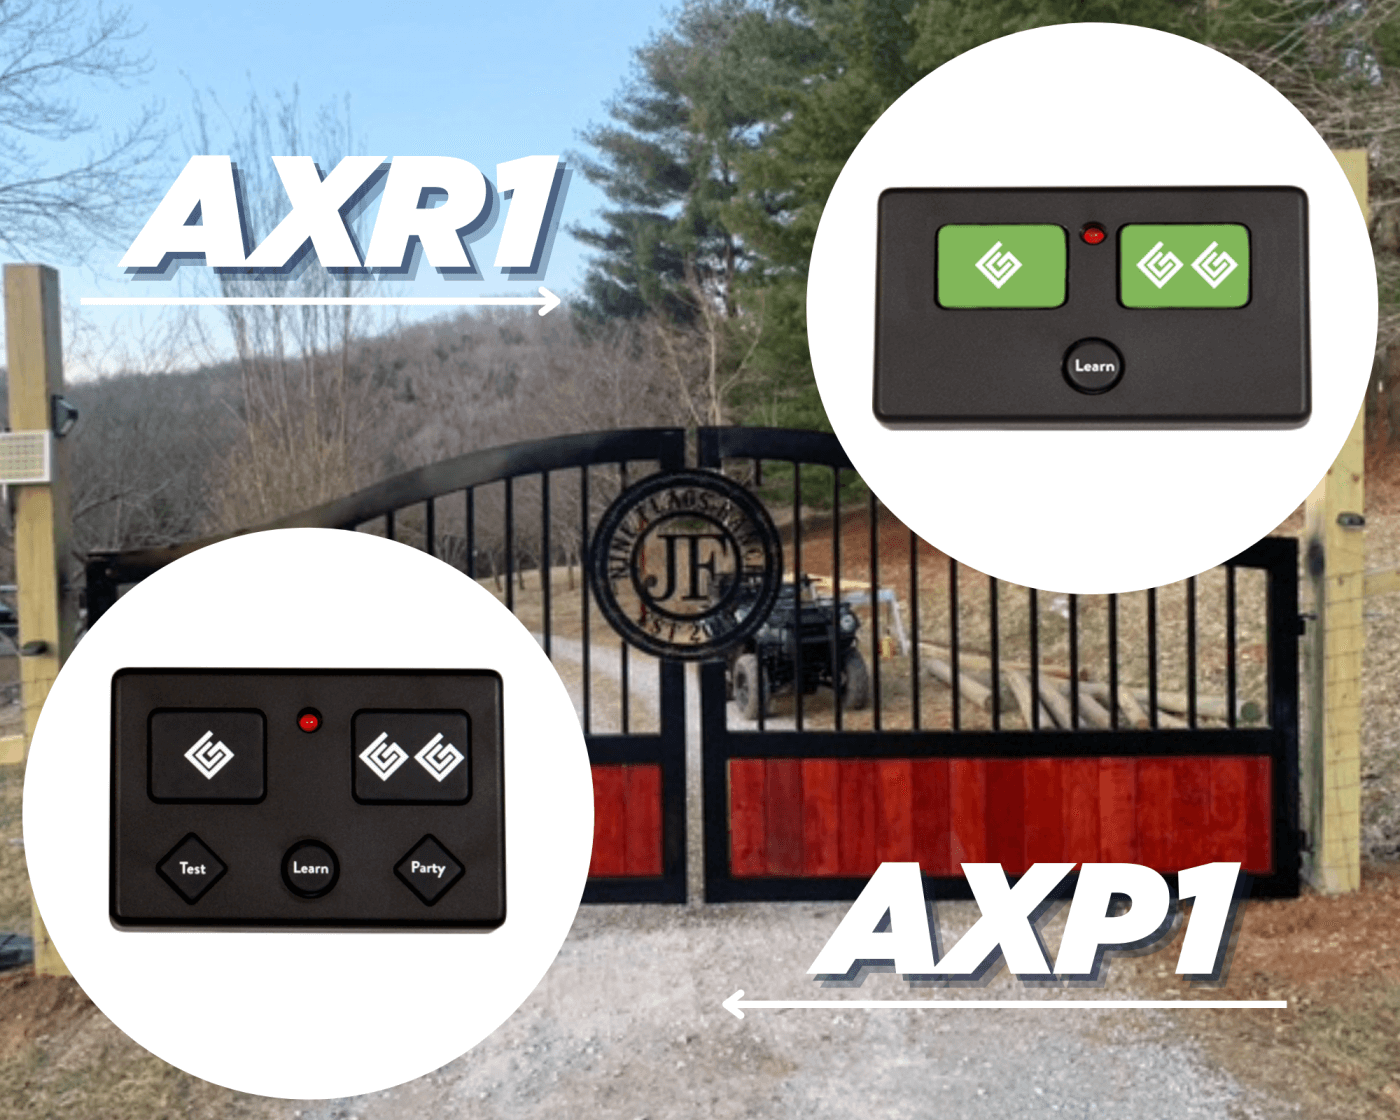 Installing A Water-Resistant Remote With A Premium Remote to Your Automatic Gate